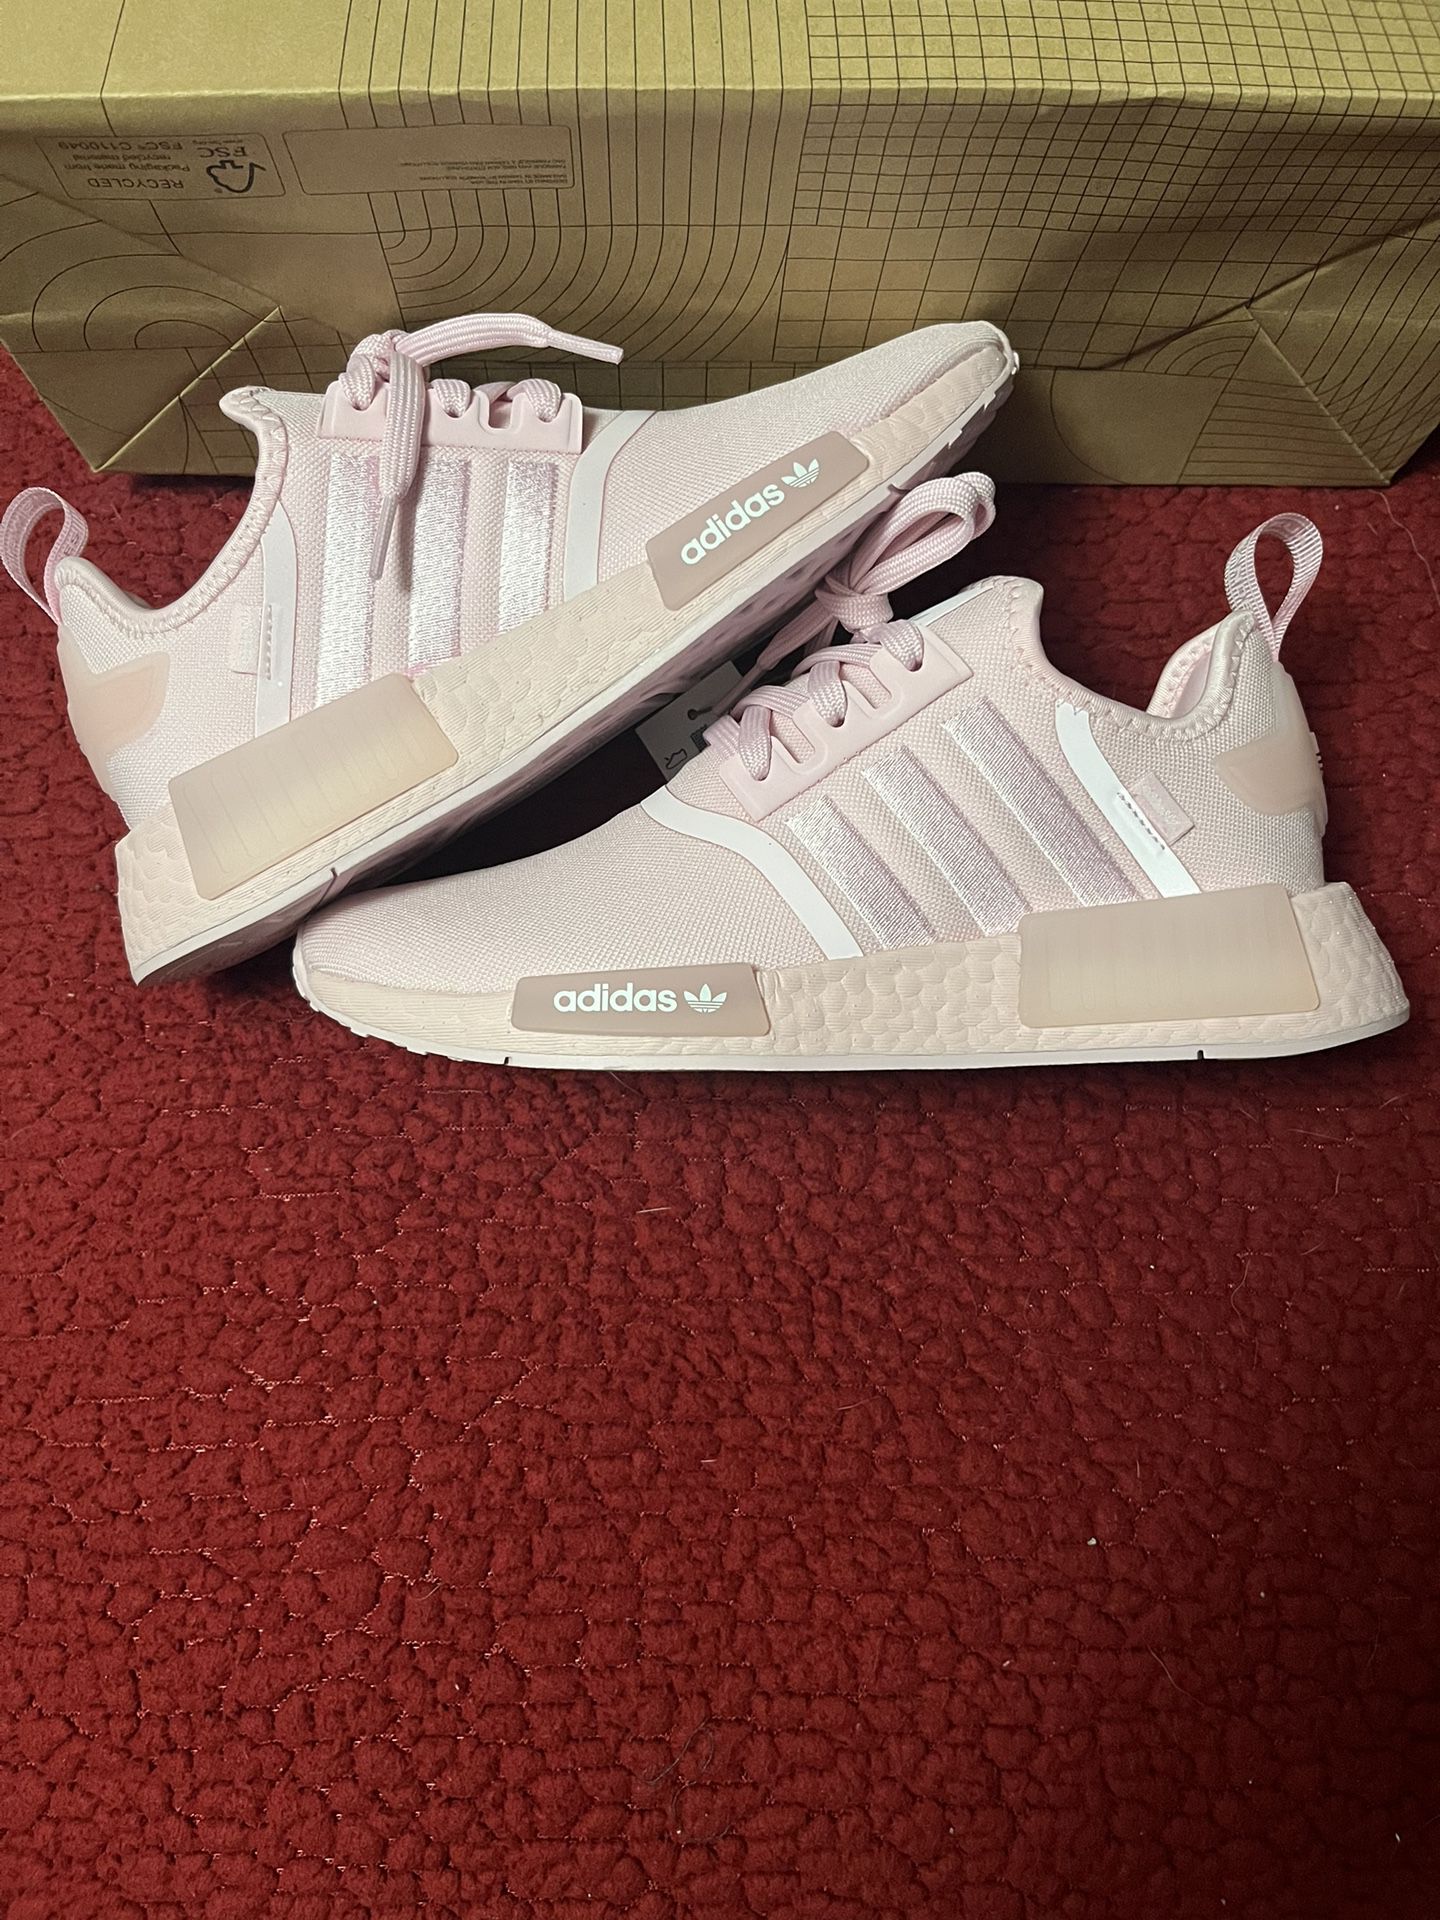 Size - adidas NMD Low Clear Pink W for Sale Torrance, CA - OfferUp